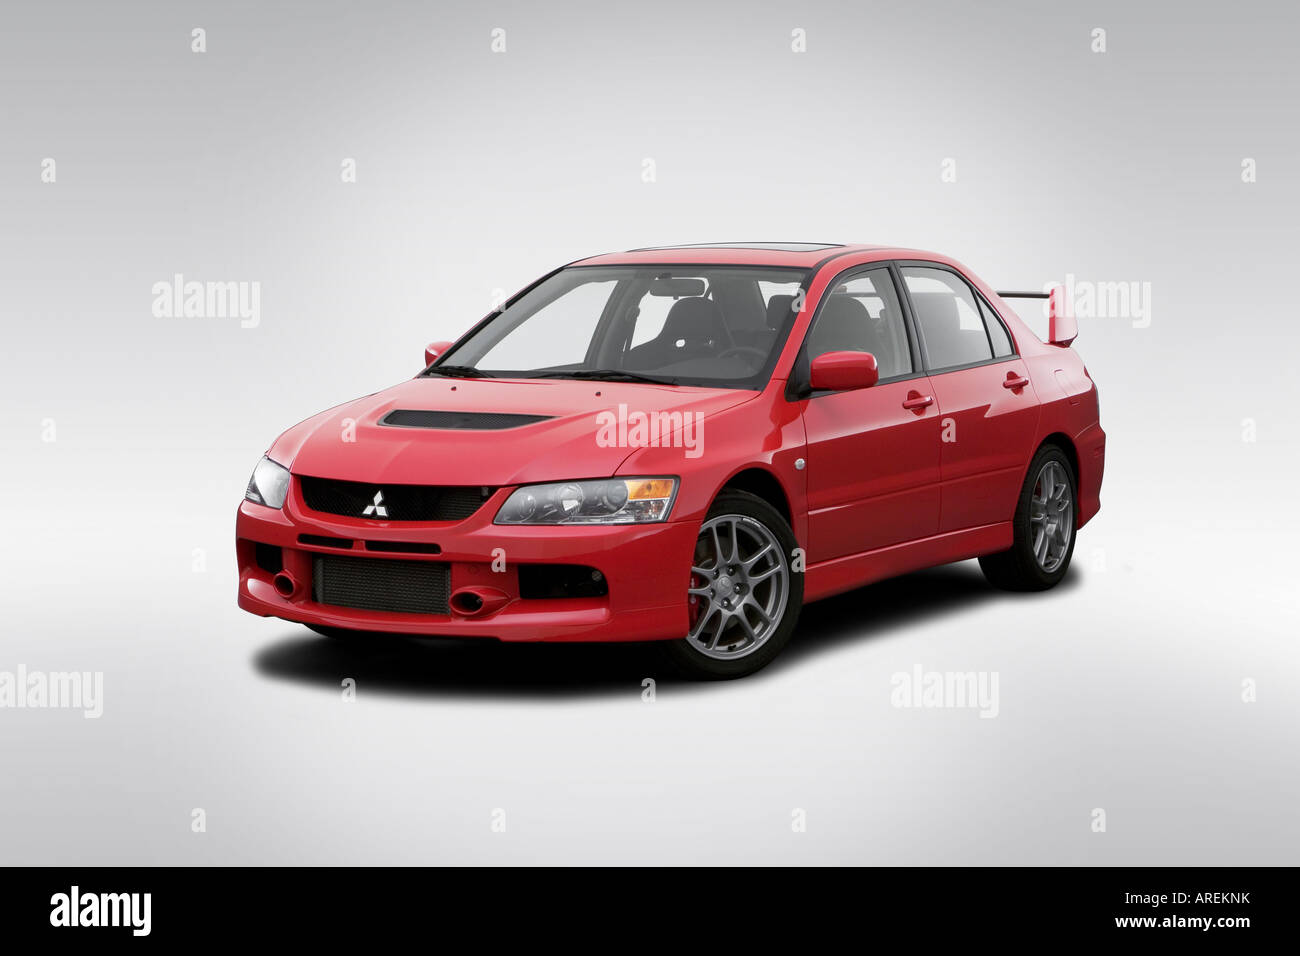 06 Mitsubishi Lancer Evolution Ix In Red Front Angle View Stock Photo Alamy